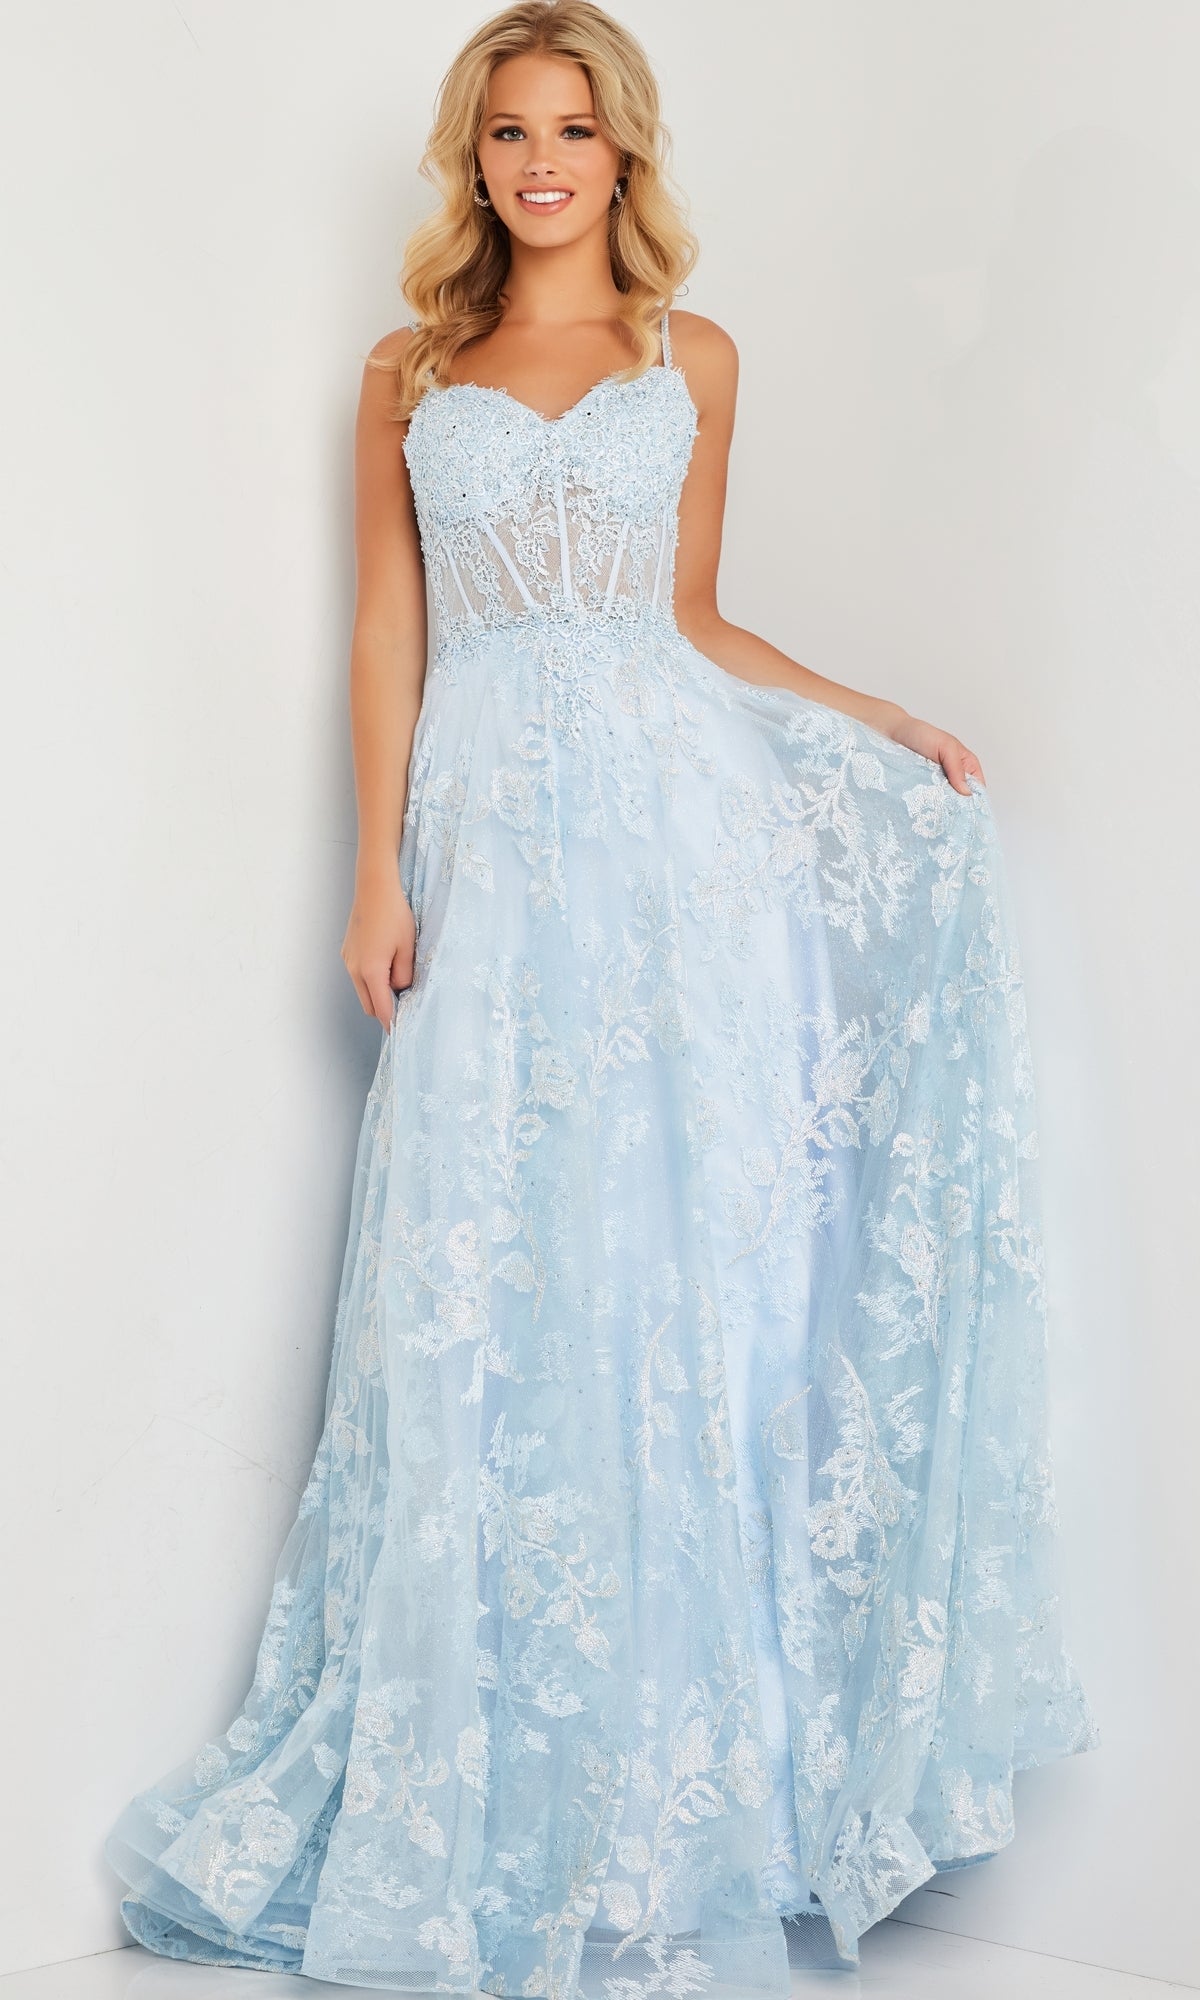 Embroidered-Lace Long A-Line Prom Dress JVN06474